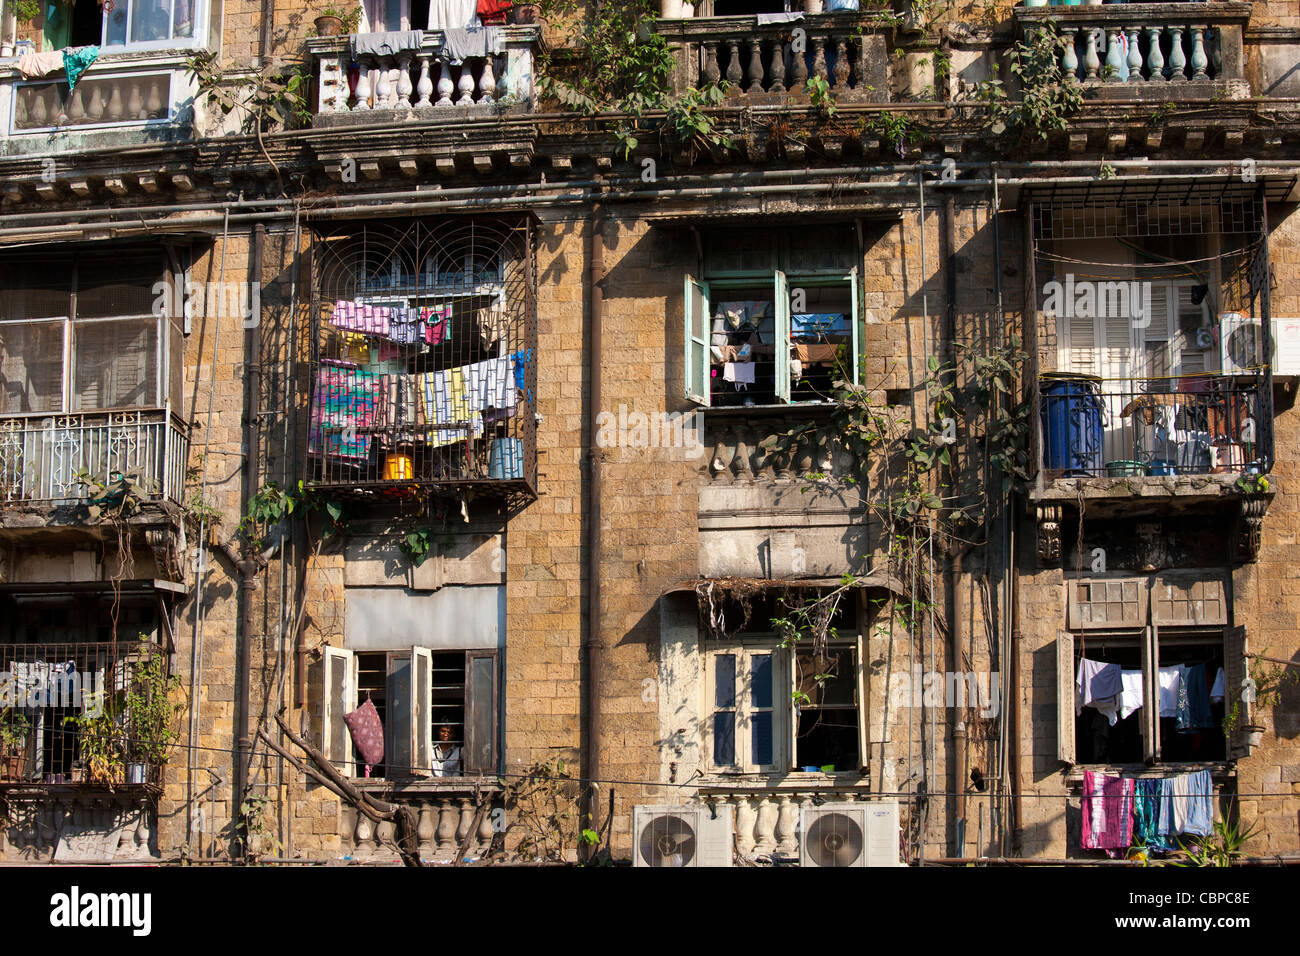 Tenement block traditional chawl housing scheme with air conditioning units and man in window in Parel area of Mumbai, India Stock Photo